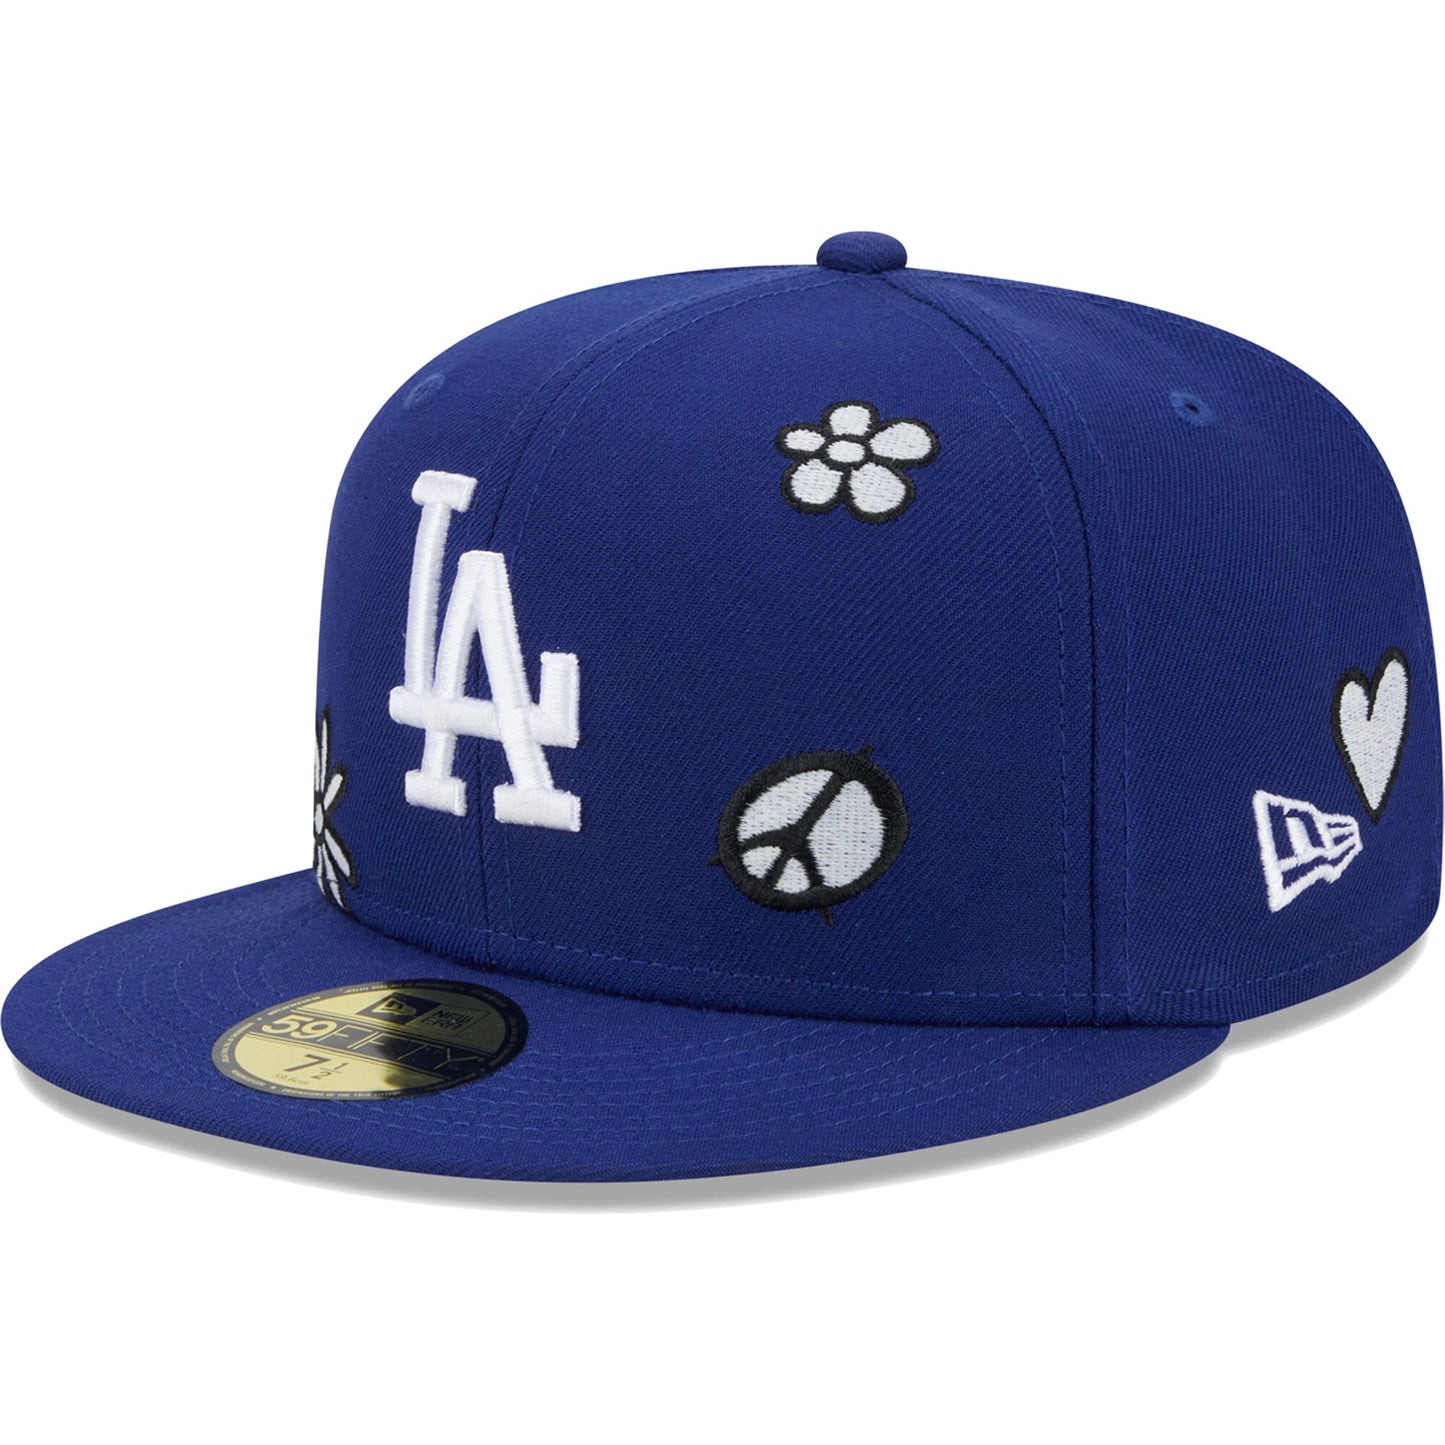 Los Angeles Dodgers New Era Sunlight Pop 59FIFTY Fitted Hat - Royal